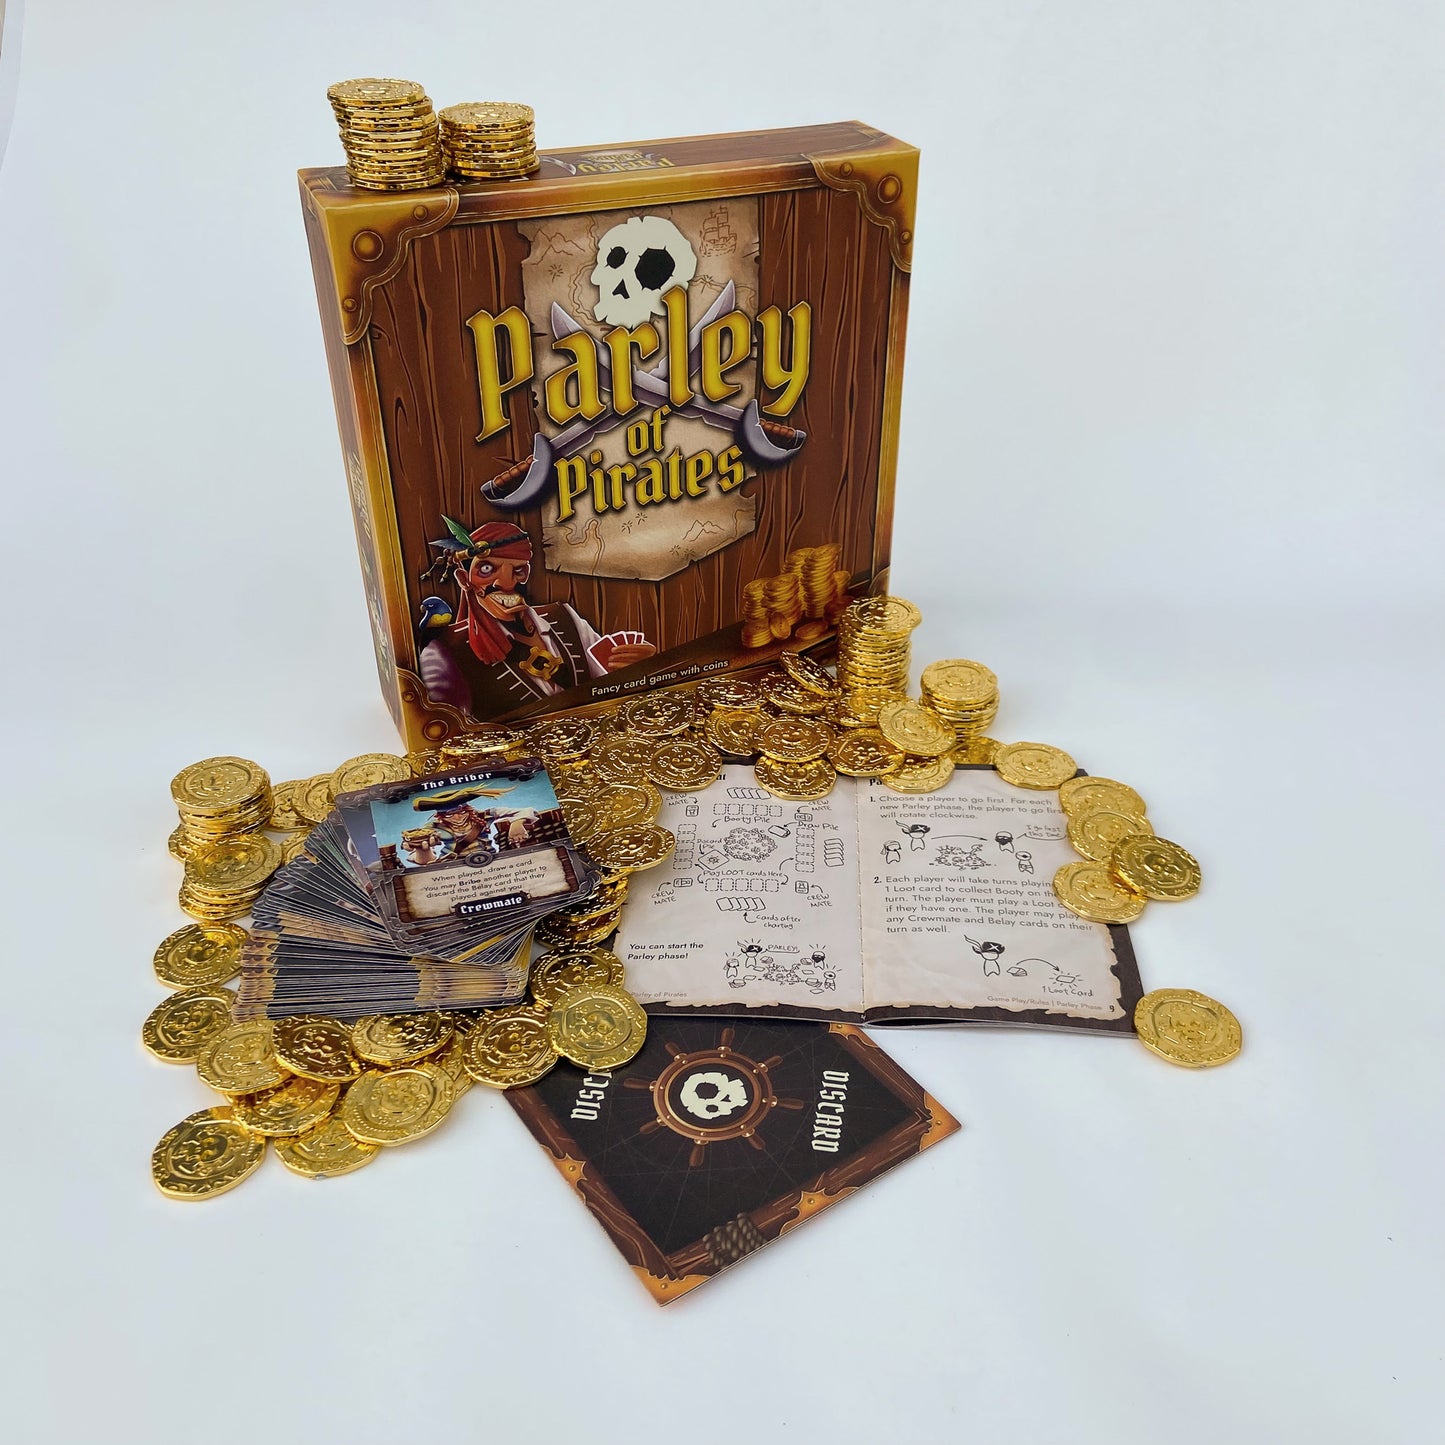 Parley of Pirates Card Game